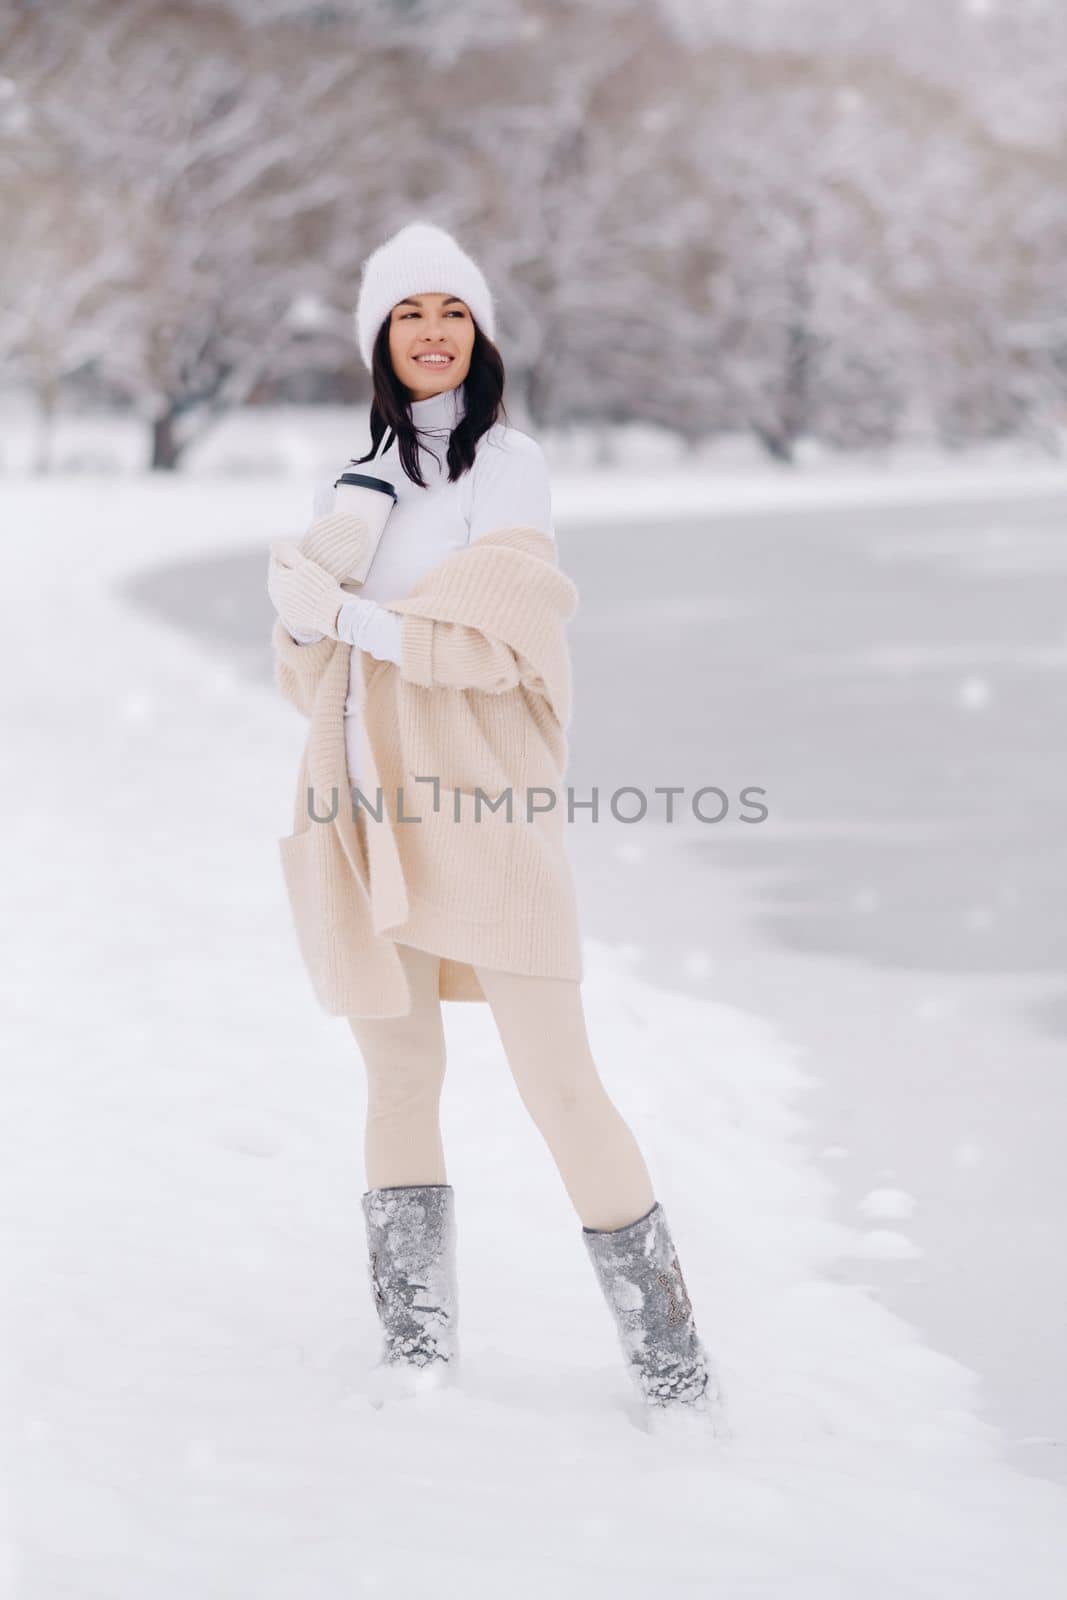 A beautiful girl in a beige cardigan and a white hat with a glass of tea enjoys a snowy embankment by the lake by Lobachad